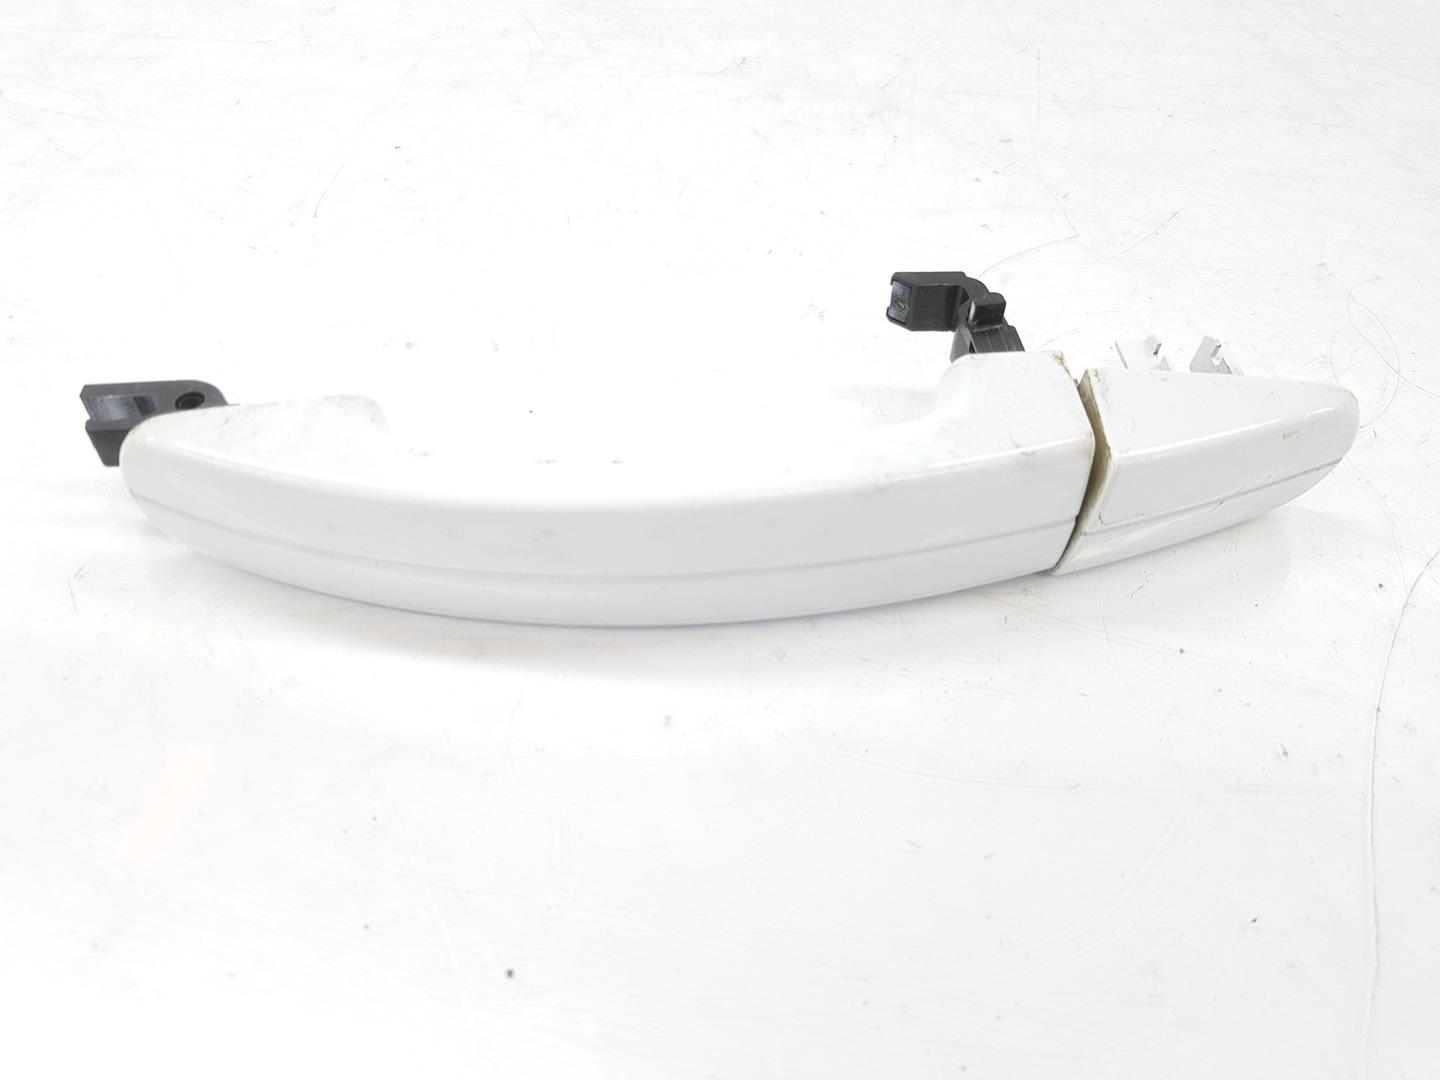 FORD Kuga 2 generation (2013-2020) Rear right door outer handle 1305822, 3M51R22404ACXWAA 19655431